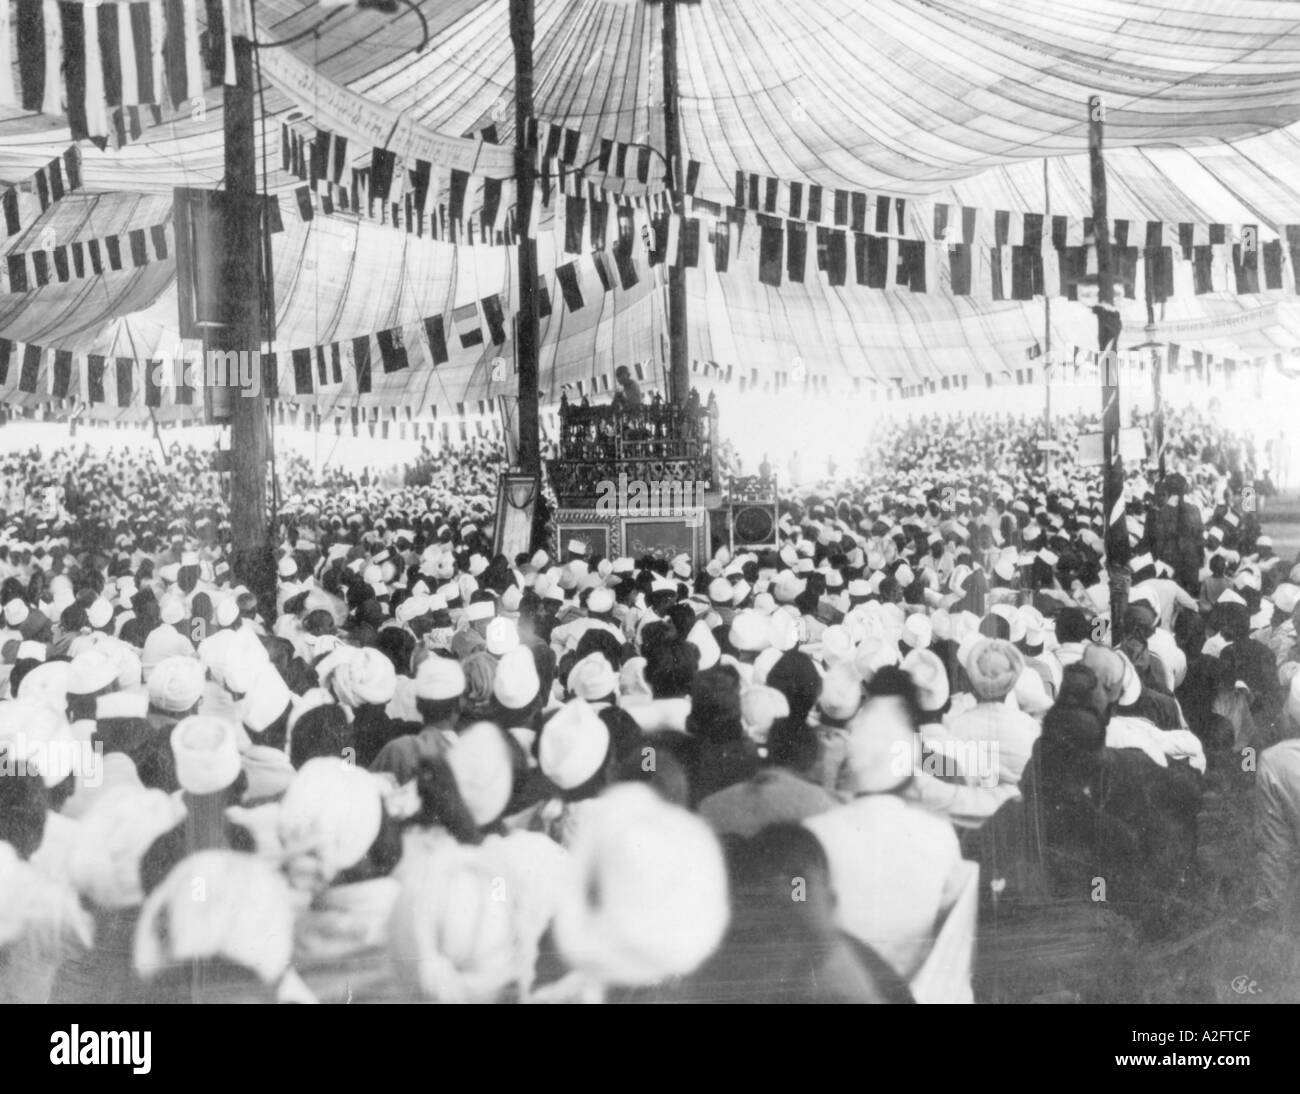 Mahatma Gandhi giving presidential speech at opening session of Belgaum Congress Maharashtra India December 1931 old vintage 1900s picture Stock Photo